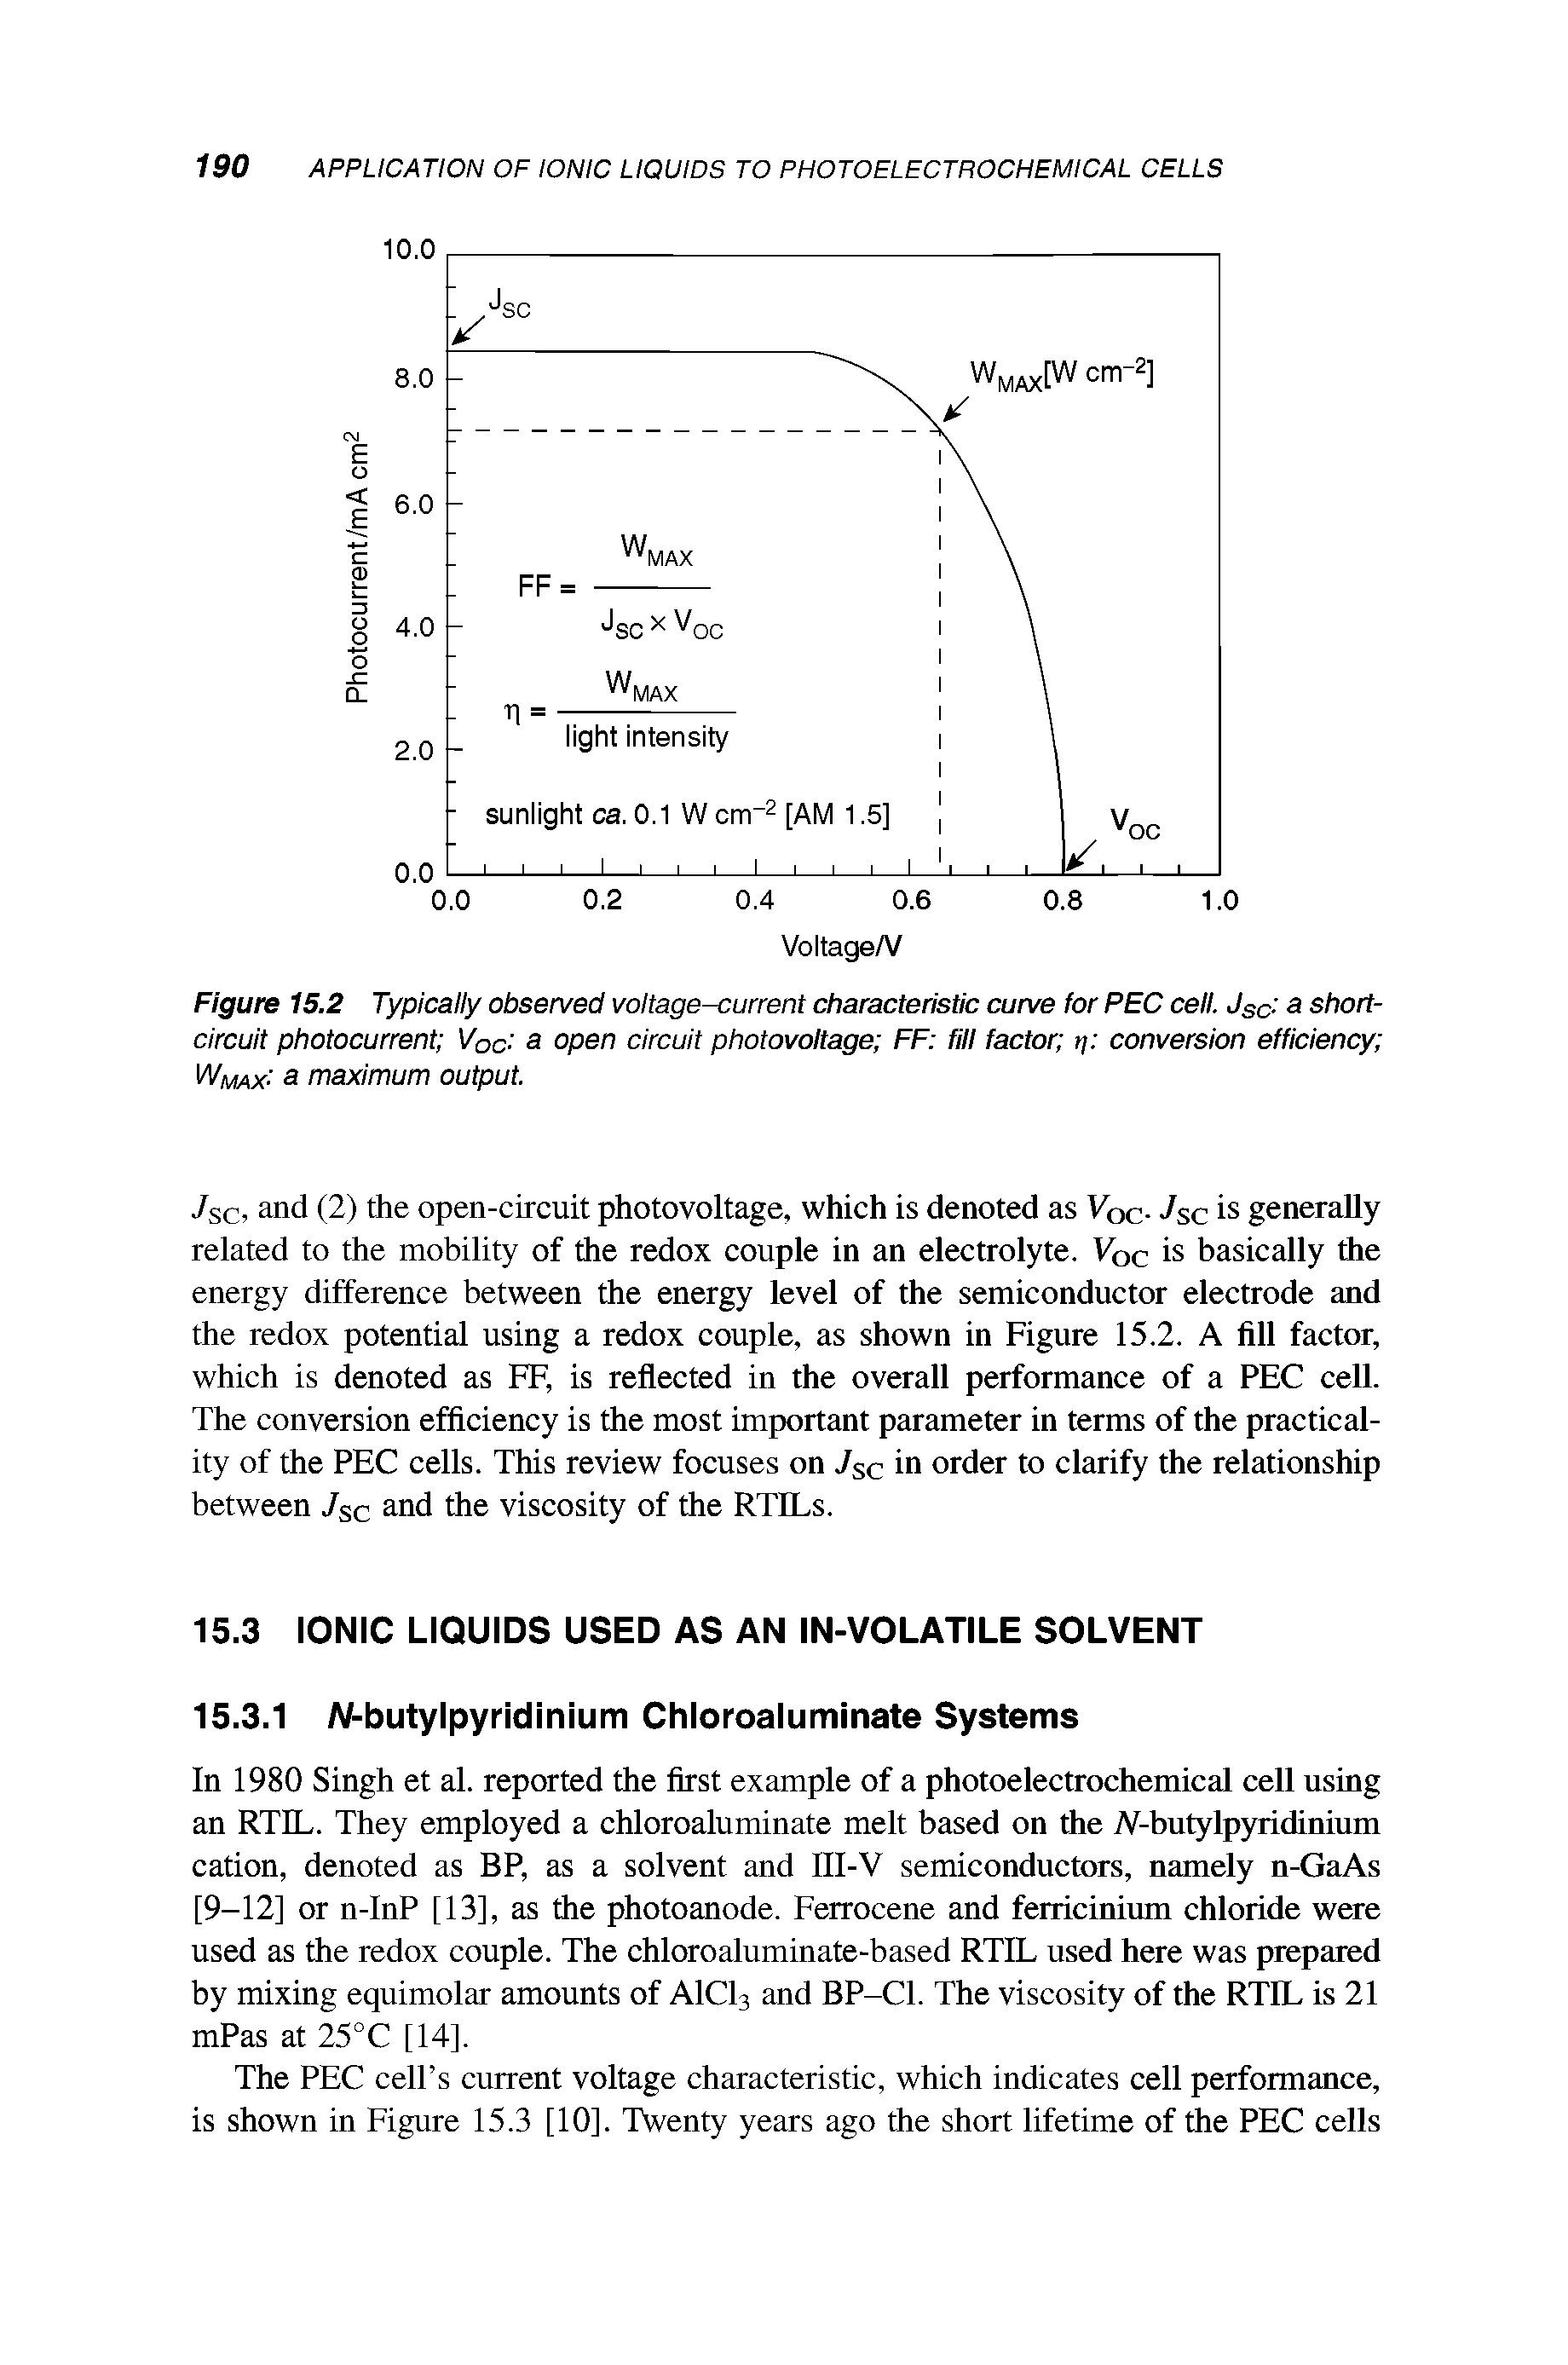 Figure 15.2 Typically observed voltage-current characteristic curve for PEC ceii. Js(> a short-circuit photocurrent Voc- a open circuit photovoltage FF fill factor, tj conversion efficiency Wmax a maximum output.